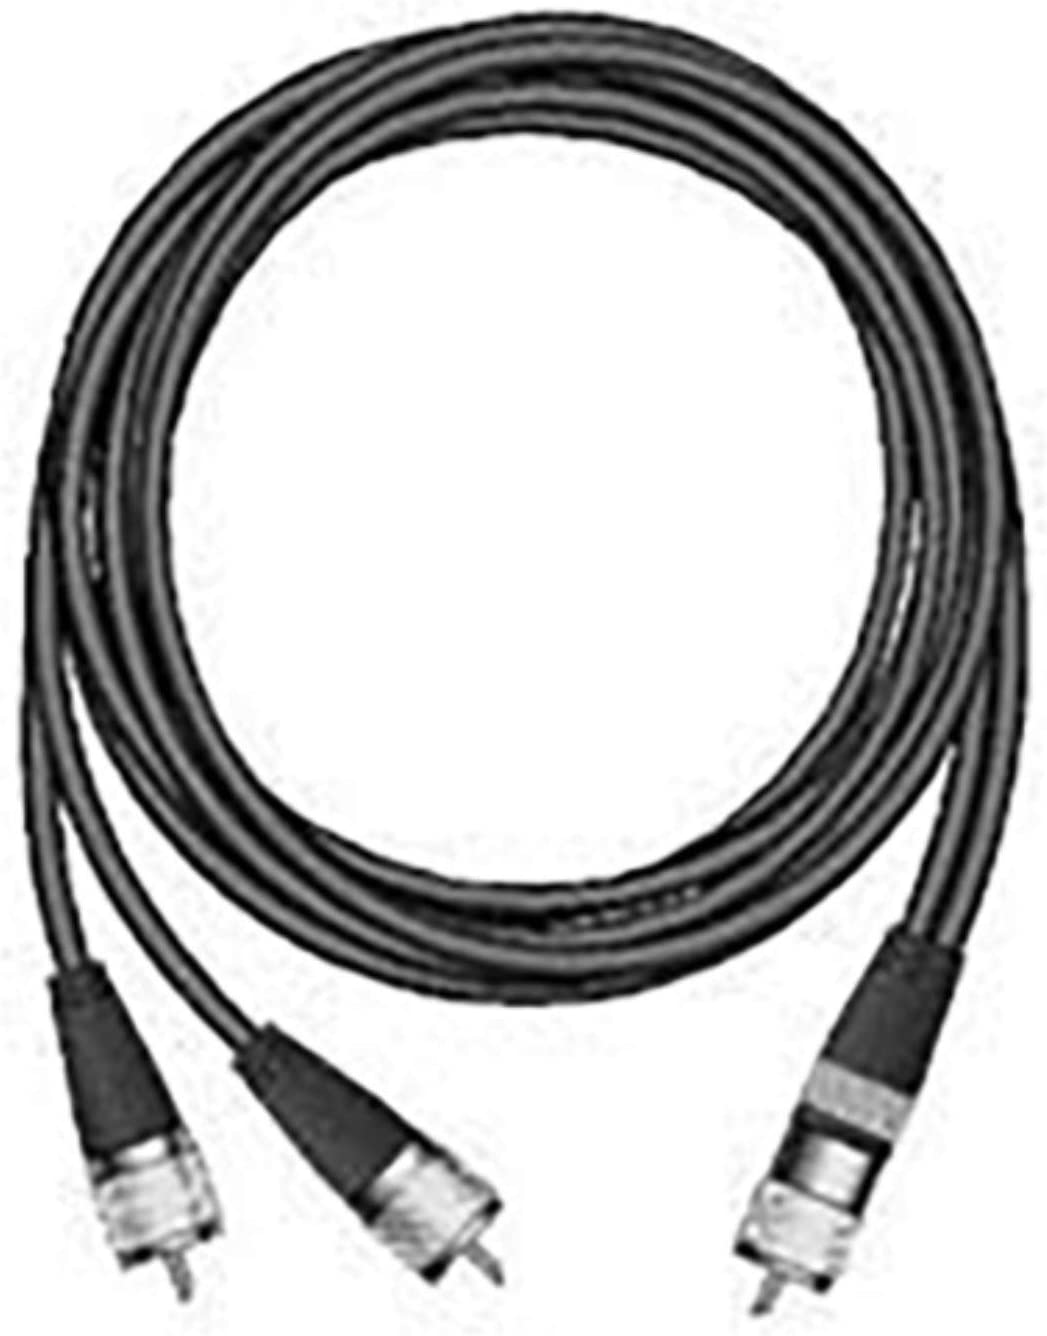 FIRESTIK ANTENNA R-9A - 9FT.CO-PHASE CABLE.9FT.CO-PHASE CABLE.